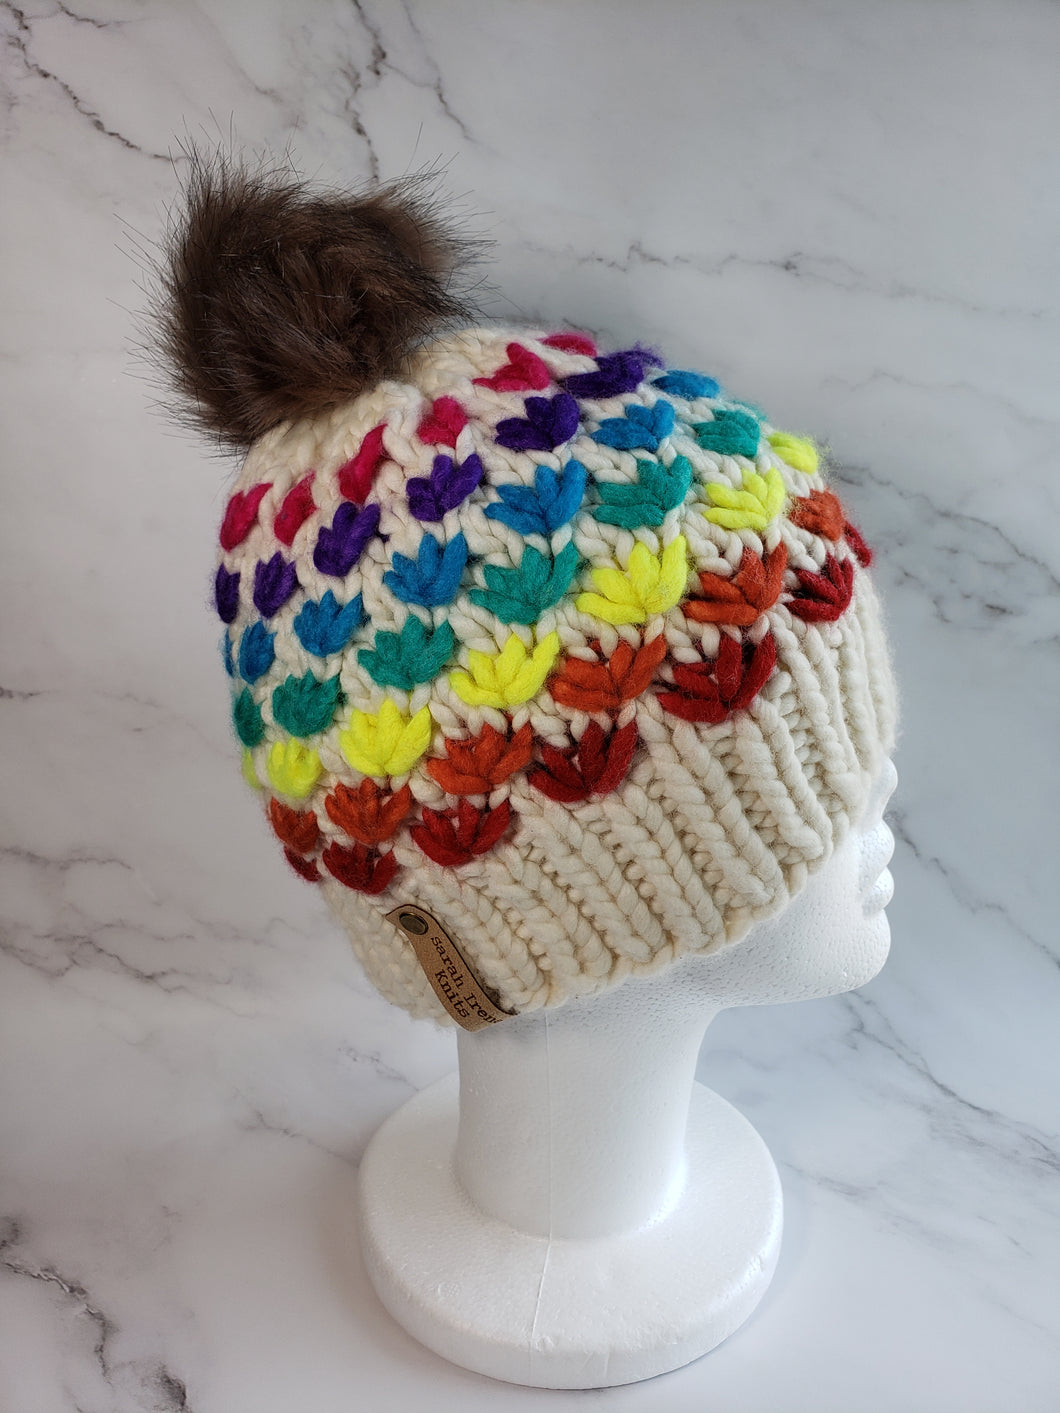 Lotus flower beanie in natural ivory wool with various rainbow colored flower rows. Brownish grey pom on top.